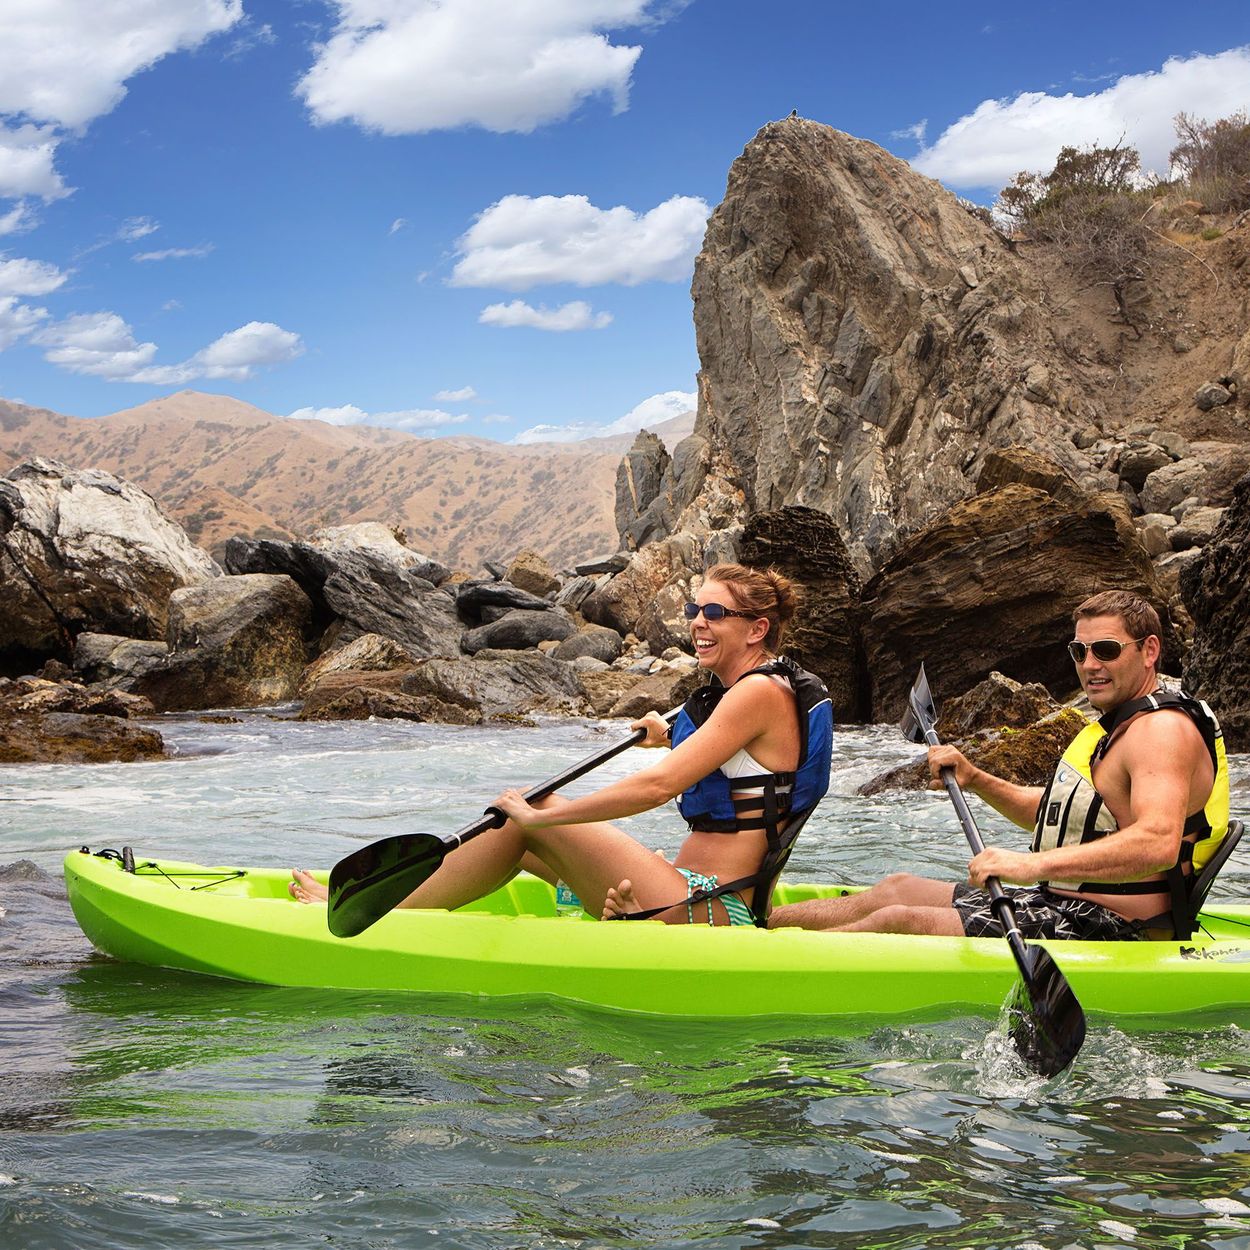 Lifestyle Side view of couple tandem kayaking by rocks showing how the kayak looks with two on the kayak.